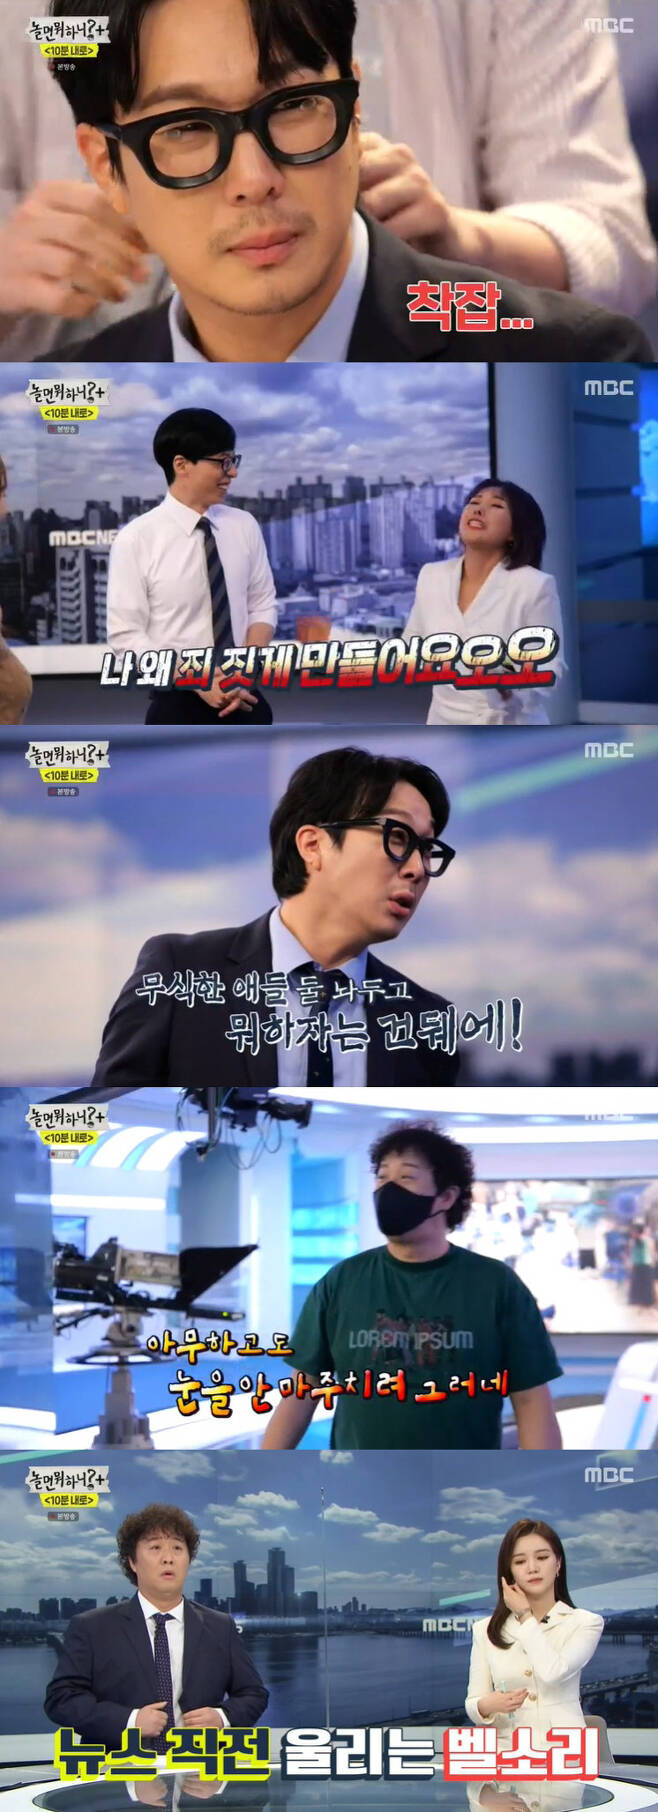 Hangout with Yoo Jin-has anti-war education was revealed.In MBC entertainment program Hangout with Yoo broadcasted on the 4th, Yoo Jae-Suk, Hahas surprise camera was released after the Americas.Haha, who suddenly turned into an MBC anchor, went on the news with a lot of tension.Haha asked the crews because he could not read 200 kwh, but he was panicked because no one informed him.Haha, who barely passed the crisis, even apologized for saying sorry.The crew put a difficult number in the script to further embarrass Haha, and kept calling Haha to make the bell ring.In front of Haha, who had barely read the script, Shin Bong-sun was on the news of the stock market. Shin Bong-sun was a little overwhelmed, but finished the news smoothly.After the show, they even cried at the thought of making a mistake on live broadcasts, and Haha confessed, Im so sorry, but it was good that you were ruined. It was comforting.Yoo Jae-Suk, the Americas, drove Your News Comment Settai No and Haha noticed that it was a surprise camera looking for an article; Haha said, The bar was out.The news is Settai, Shin Bong-sun said, I almost felt better playing at home when I was so abusive.Soon Shin Bong-sun was also told that it was a surprise camera and relieved, he got back to laughing at the saying that there was the next scapegoat.The next scapegoat was Jeong Jun-ha, who was stunned by the sudden news input and began live broadcasts full of tension.Jeong Jun-ha, whose soul was out of the picture, started the news with a moist eye and laughed.The production team put a handkerchief buried in black gin-ha secretly, and Jin-ha continued to broadcast with black gin on his face.Jeong Jun-ha, who was hurried to face the announcer Jung Dae-hee, prepared a closing Re-Ment with a face full of water.Among the closing Re-Ment, Jung Dae-hee announcer suddenly asked Jeong Jun-ha to show her new song A Shrimp choreography, and Jeong Jun-ha performed an instant live stage.Jeong Jun-ha, who saw his face after the news, was surprised to say, I made my face a beggar.Yoo Jae-Suk and Haha hit Settai, saying, My brother is out now. Jeong Jun-ha said, Do you do this next week?In front of Yoo Jae-Suk, which opened the door to the question, a sort test was waiting; Haha, Shin Bong-sun, and the Americas also came through the door, performing a series of orthography tests.The following test participants are Jeong Jun-ha.Kim Tae-ho PD told Yoo Jae-Suk that he was from Seoul National University, and Yoo Jae-Suk said, Seoul National University Graduate School of Health Food and Food Industry Health CEO.I also won a sommelier course for six people a year, and it was the number one member of the IQ. High-educated Jin-ha was eliminated from the first stage and comforted the members.Yoo Jae-Suk teased him as from the School of Health at Seoul National University as soon as Jeong Jun-ha appeared, and Jeong Jun-ha said, I hid for six months because I was afraid I would be teased.Haha asked, Do you listen to the Internet class or go directly? And Jeong Jun-ha said, Going, taking classes.The supervision quiz followed by the progress of Yoo Jae-Suk, who took the top spot in the spelling test.Jin-ha was ranked 5th in elementary school and 15th in middle school, and dreamed of going to medical school.Yoo Jae-Suk laughed at Jeong Jun-ha, saying he catched a skewer instead of a scalpel.Then, during the introduction of Shin Bong-sun, childhood photos were released.Shin Bong-suns photo devastated everyone and Shin Bong-sun appealed, I did not have double eyelid surgery, but I can not see the picture in high school.Shin Bong-sun, who was called Shinmina until he was seven, said, After becoming Bongseon, I suddenly started to gain weight.